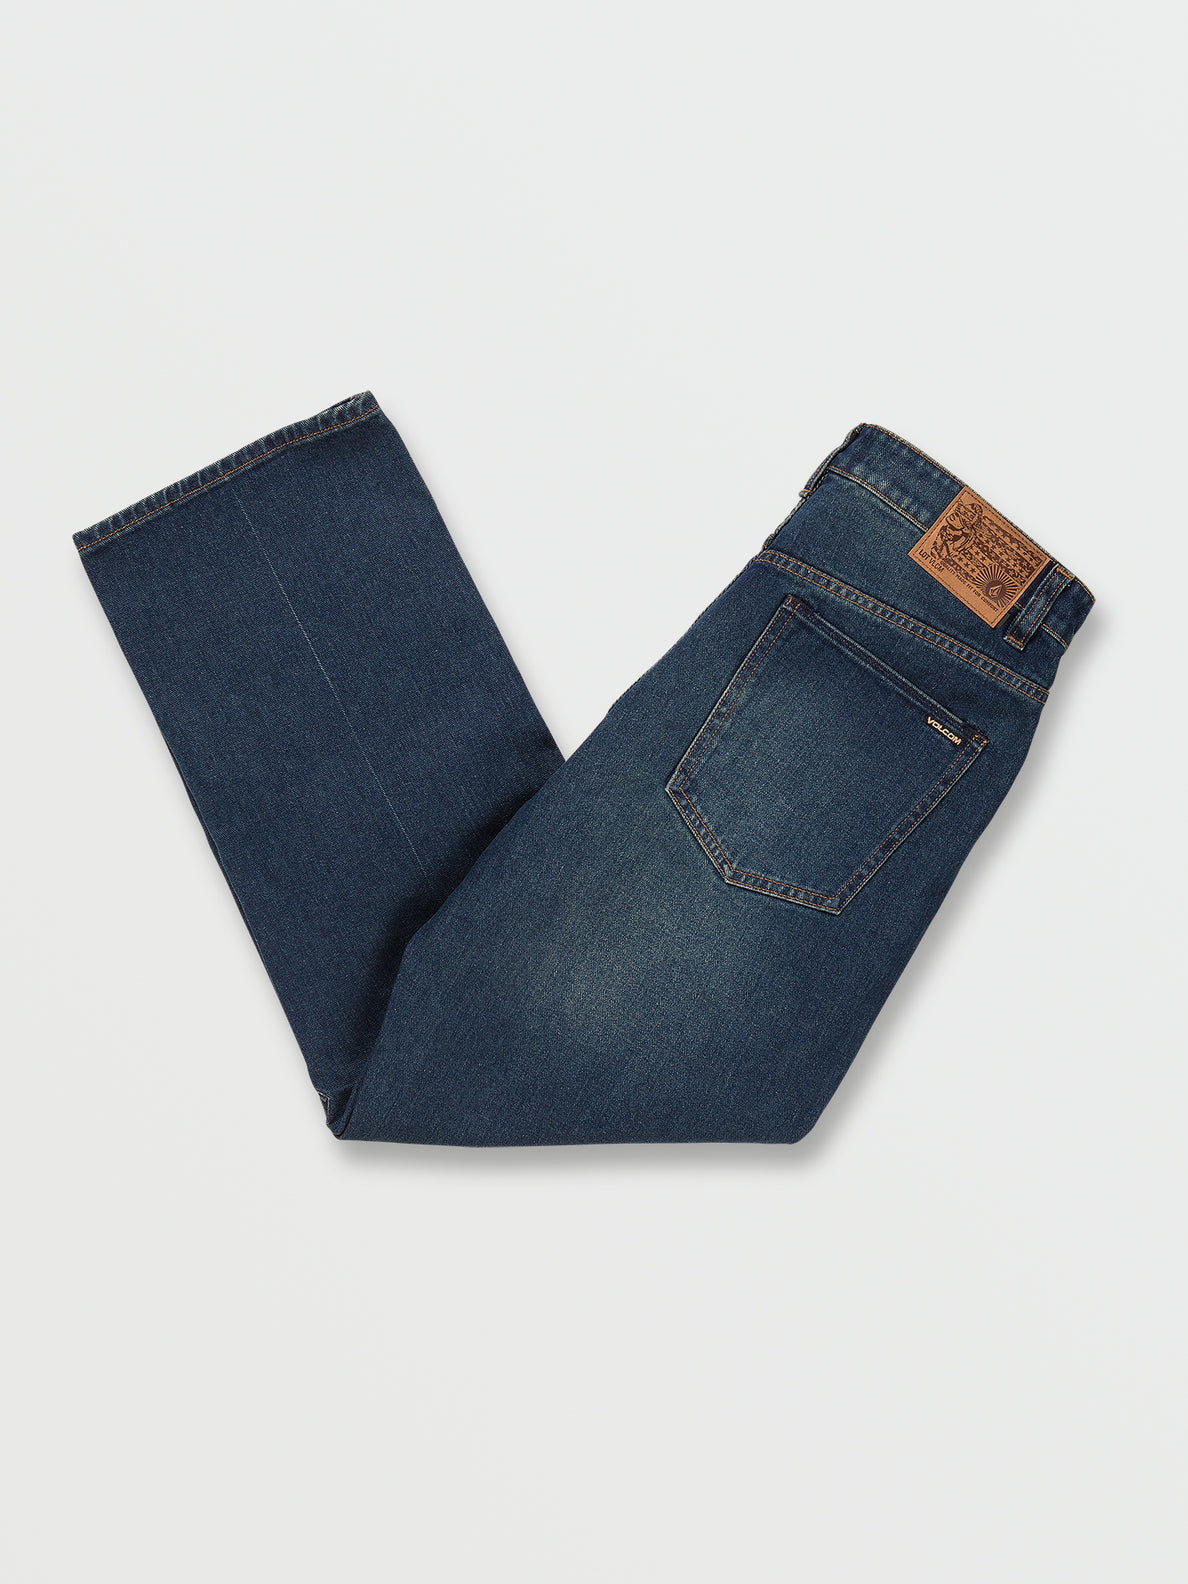 Nailer Loose Tapered Fit Jeans - Matured Blue (A1912304_MBL) [B]